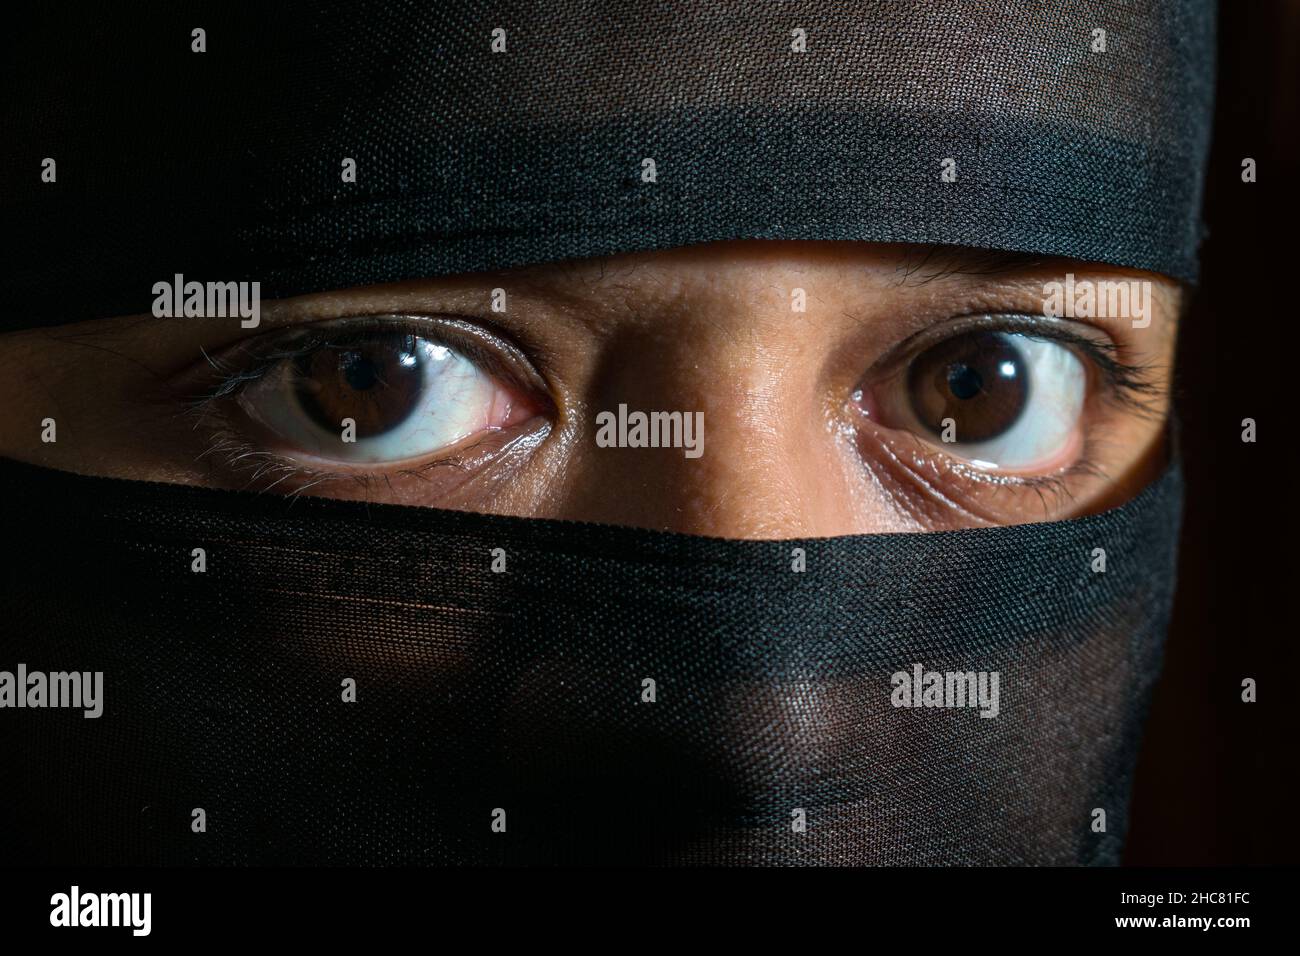 Close-up of the eyes with brown iris of a young woman wearing a black veil Stock Photo